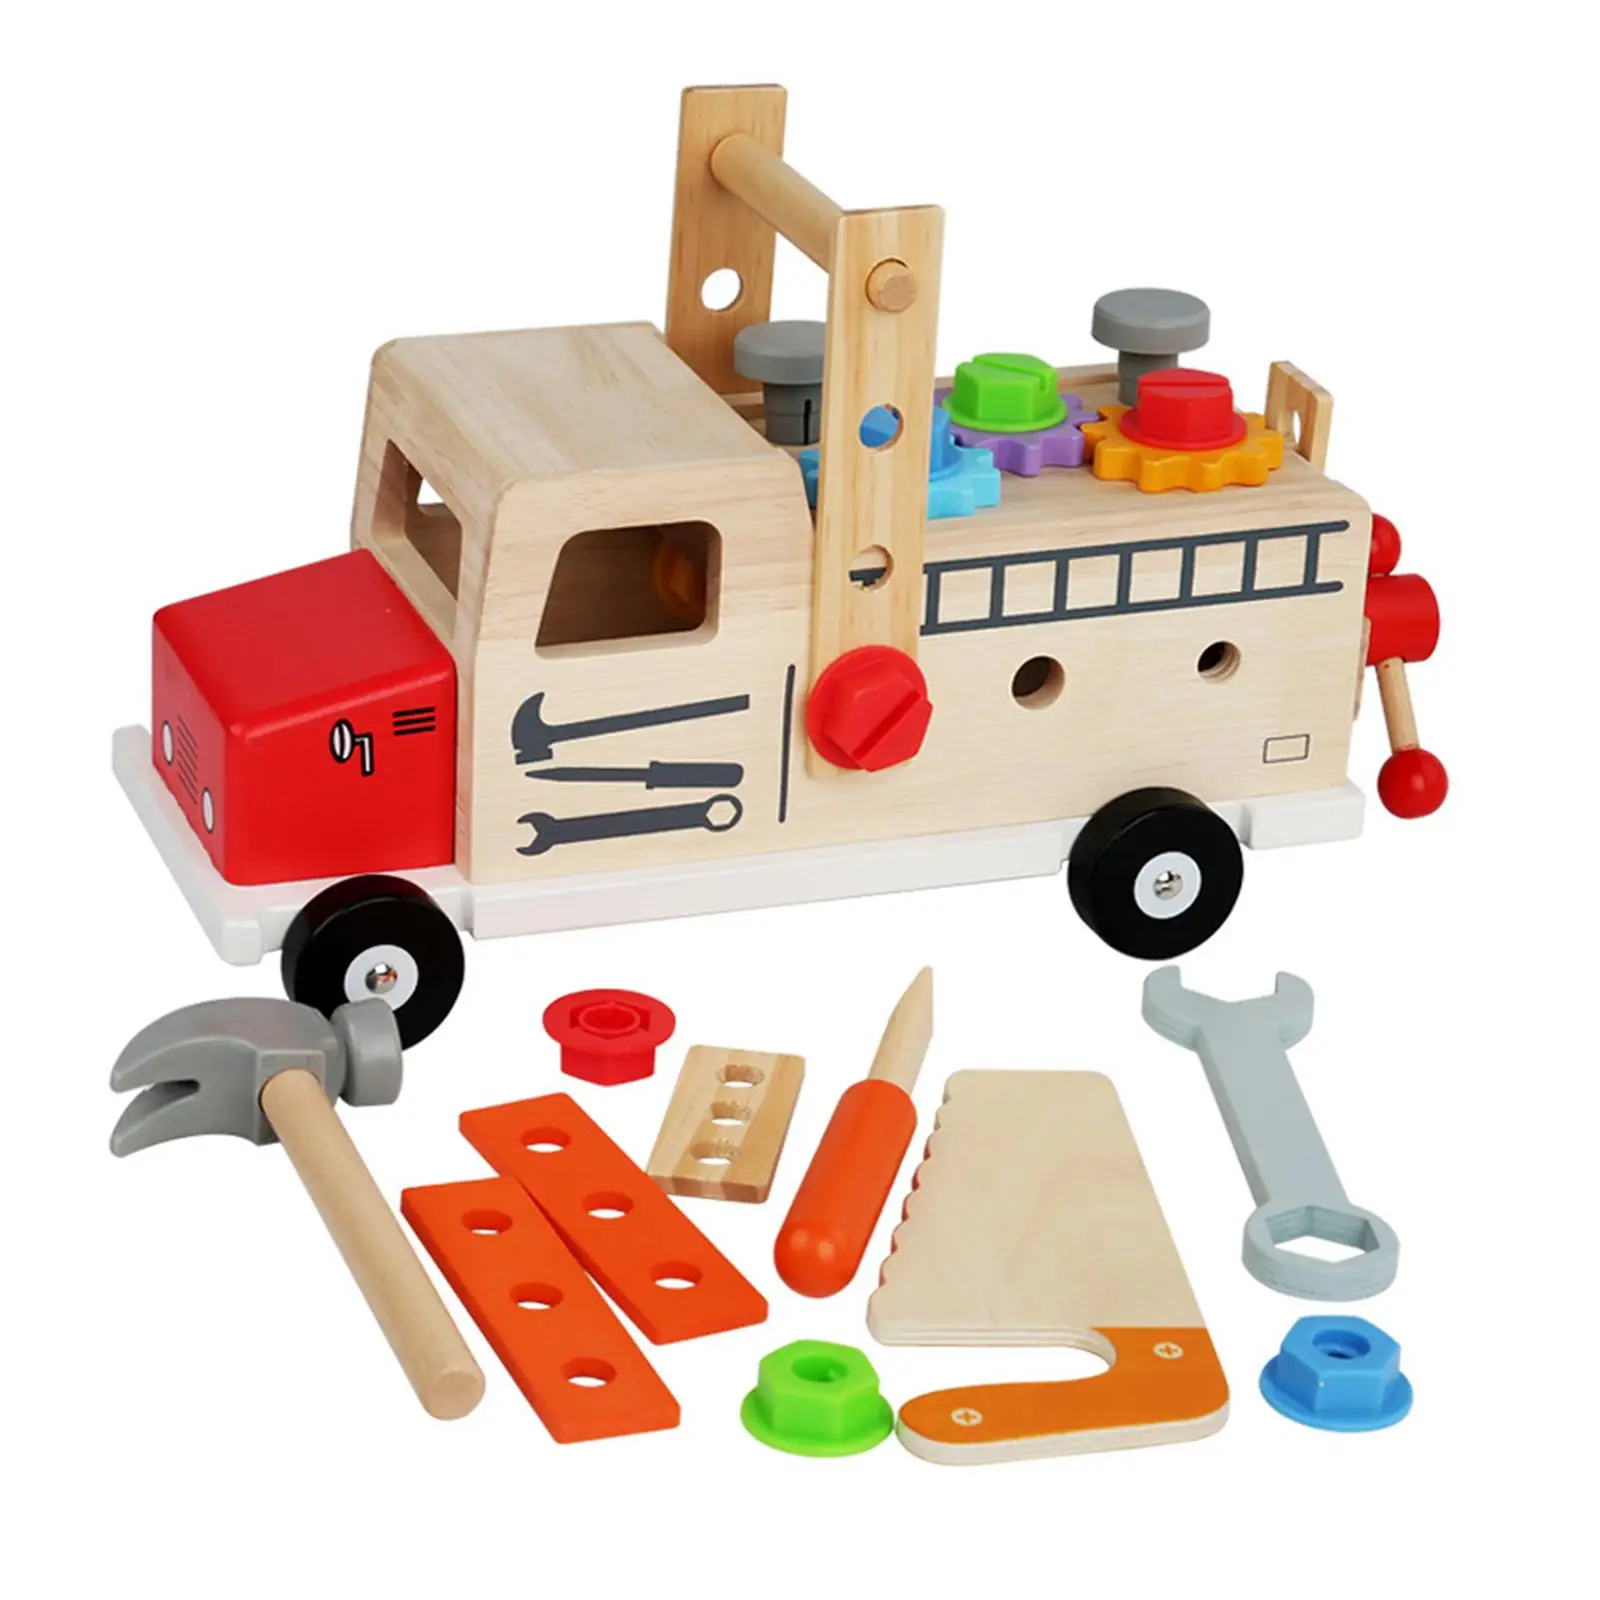 Wood Kids Tool Set Construction Toys Kids Tool Screwing Assembly Carpenter Toy for 3 4 5 6 Years Old Boys Girls Party Favors